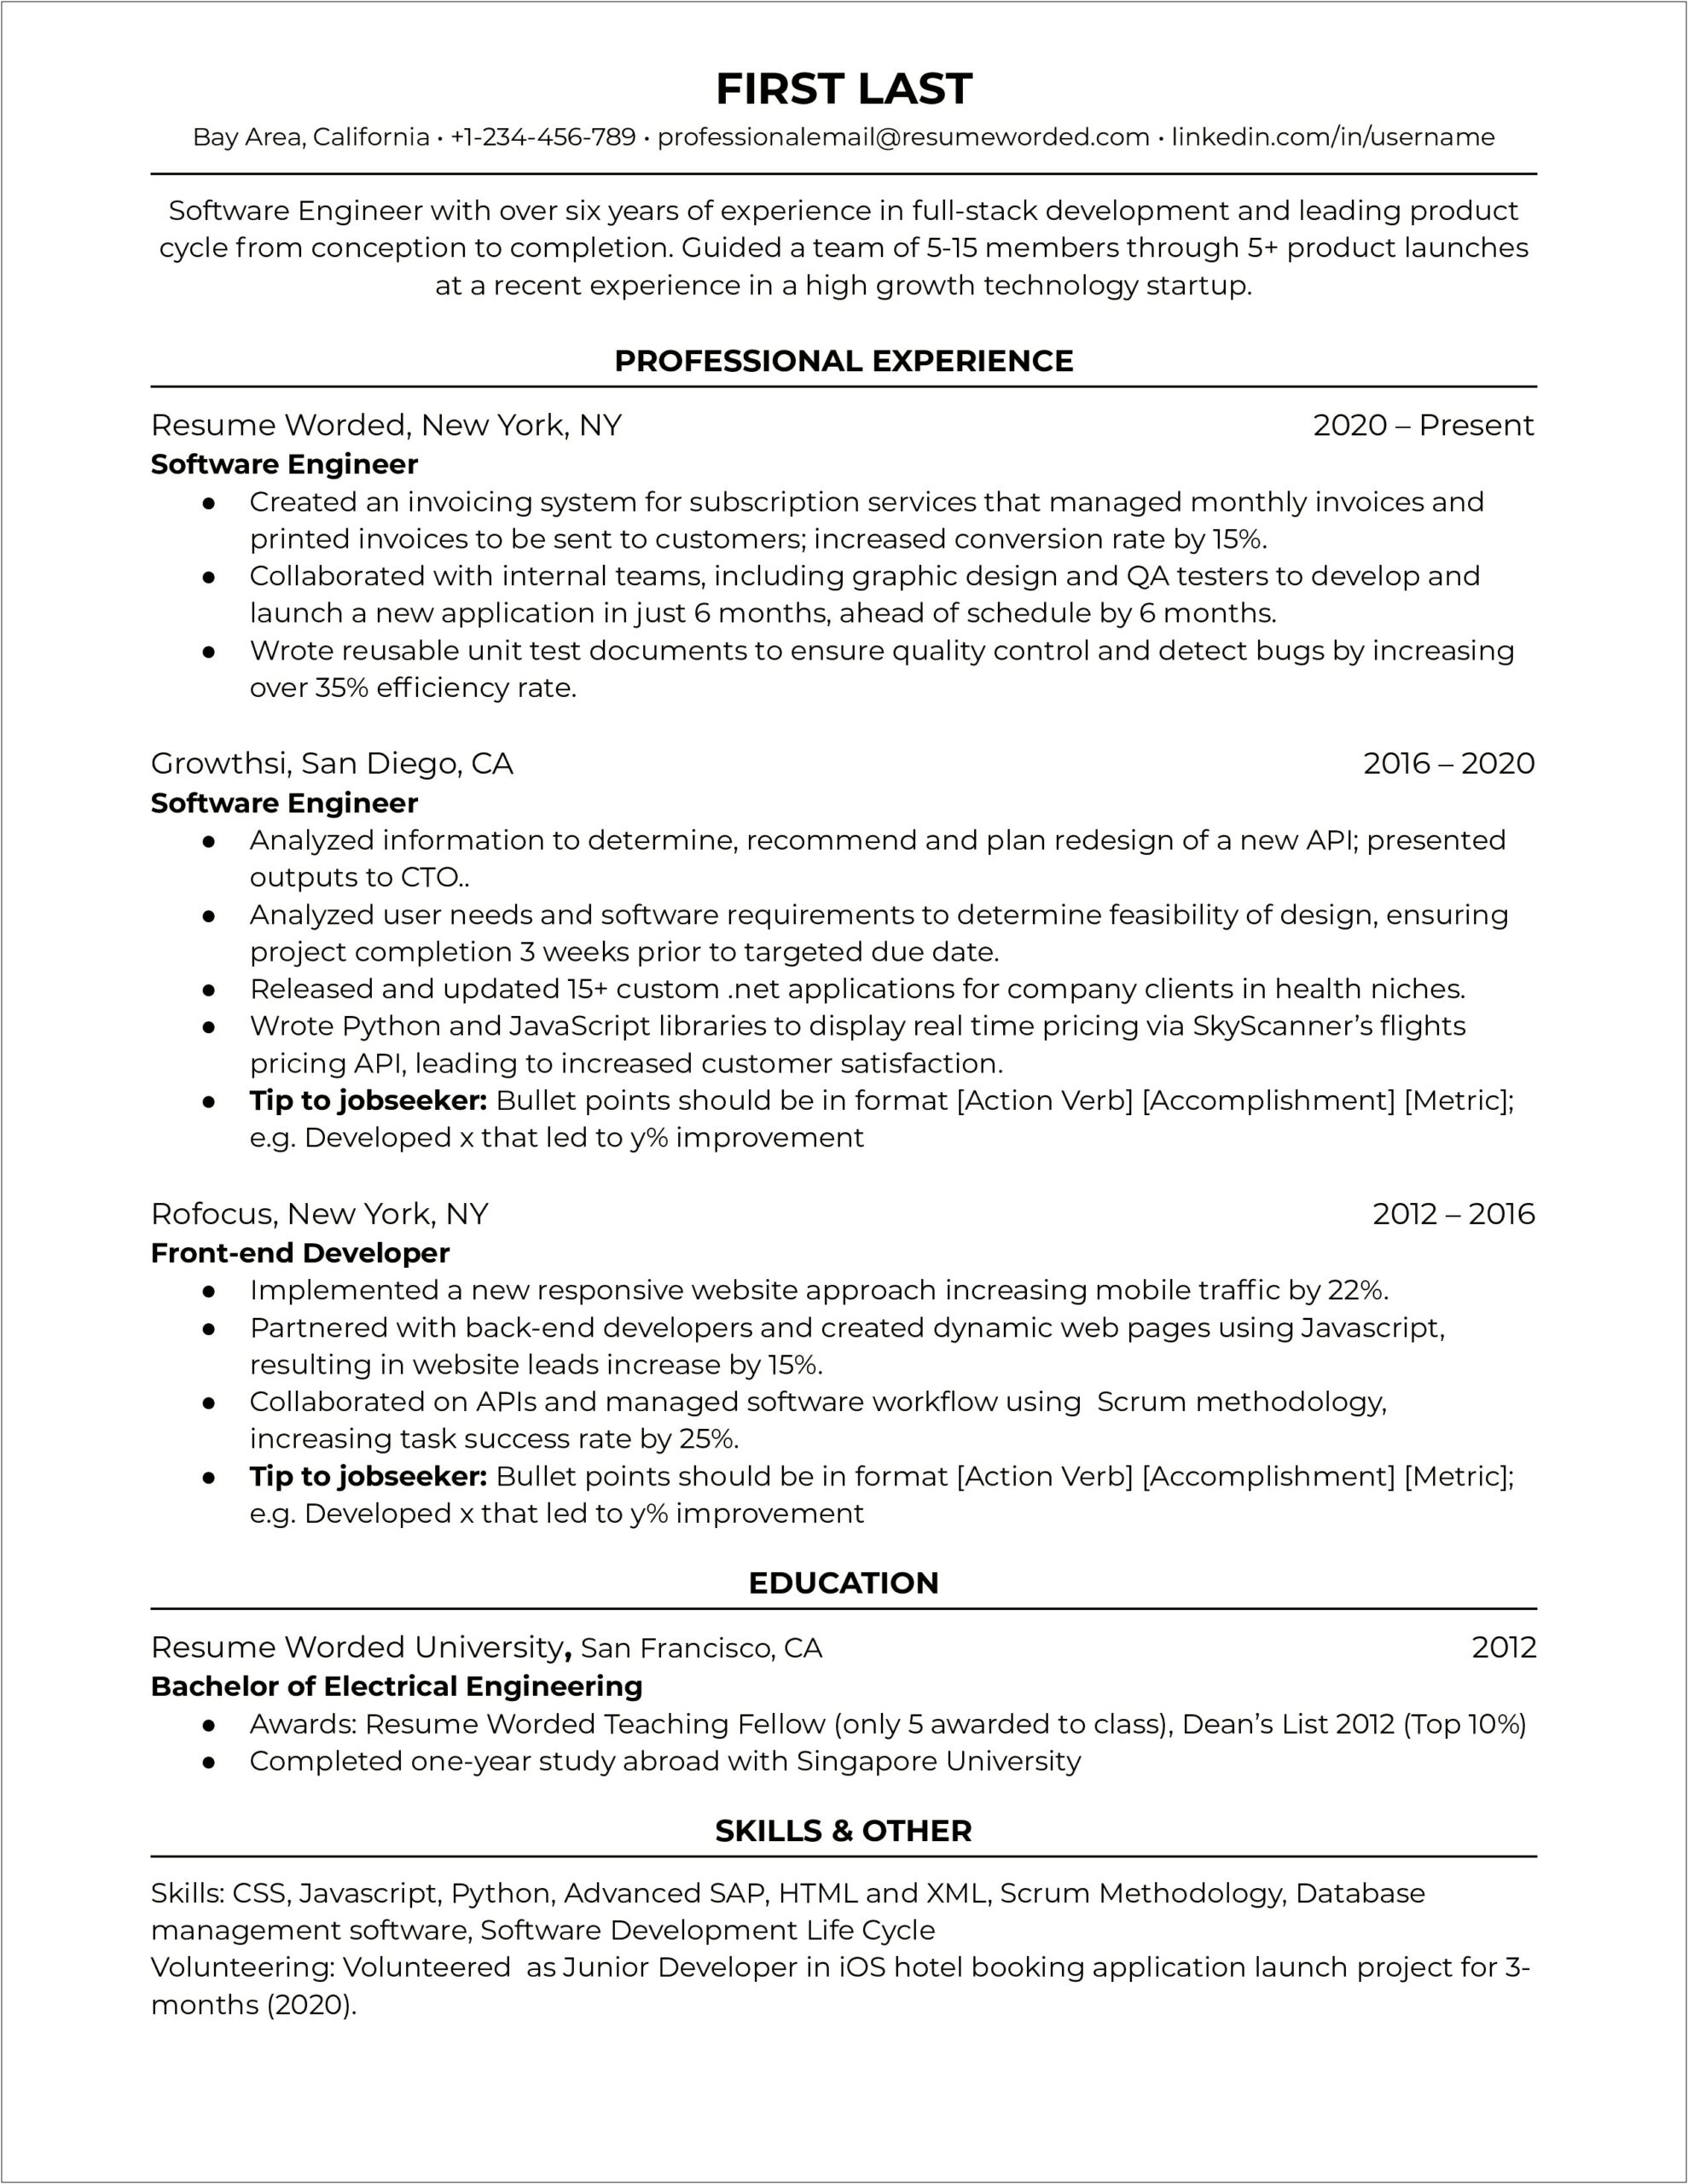 Software Engineer Project Resume Examples